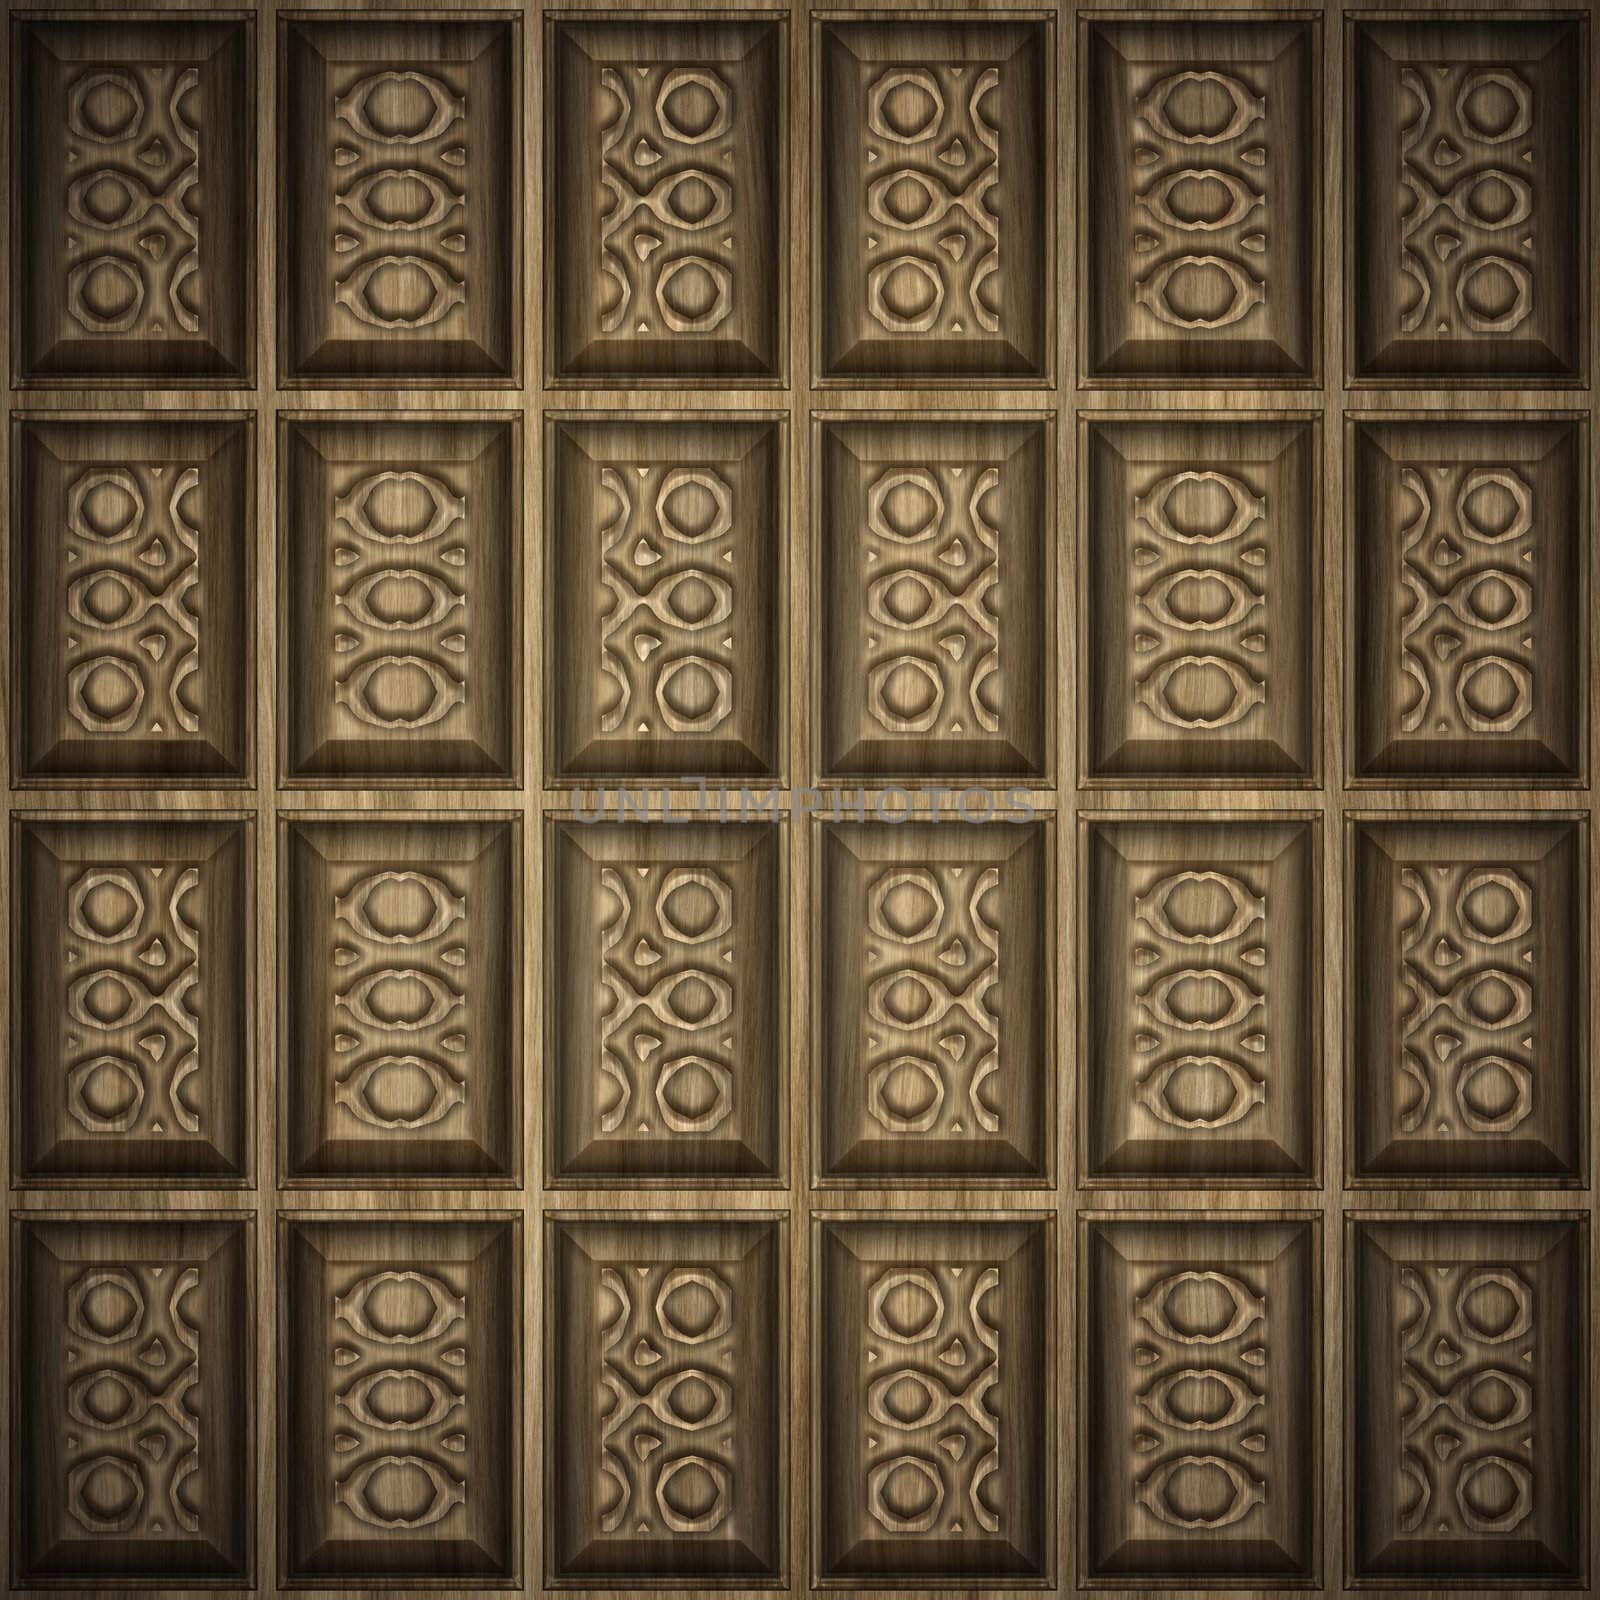 great background image of wooden panels